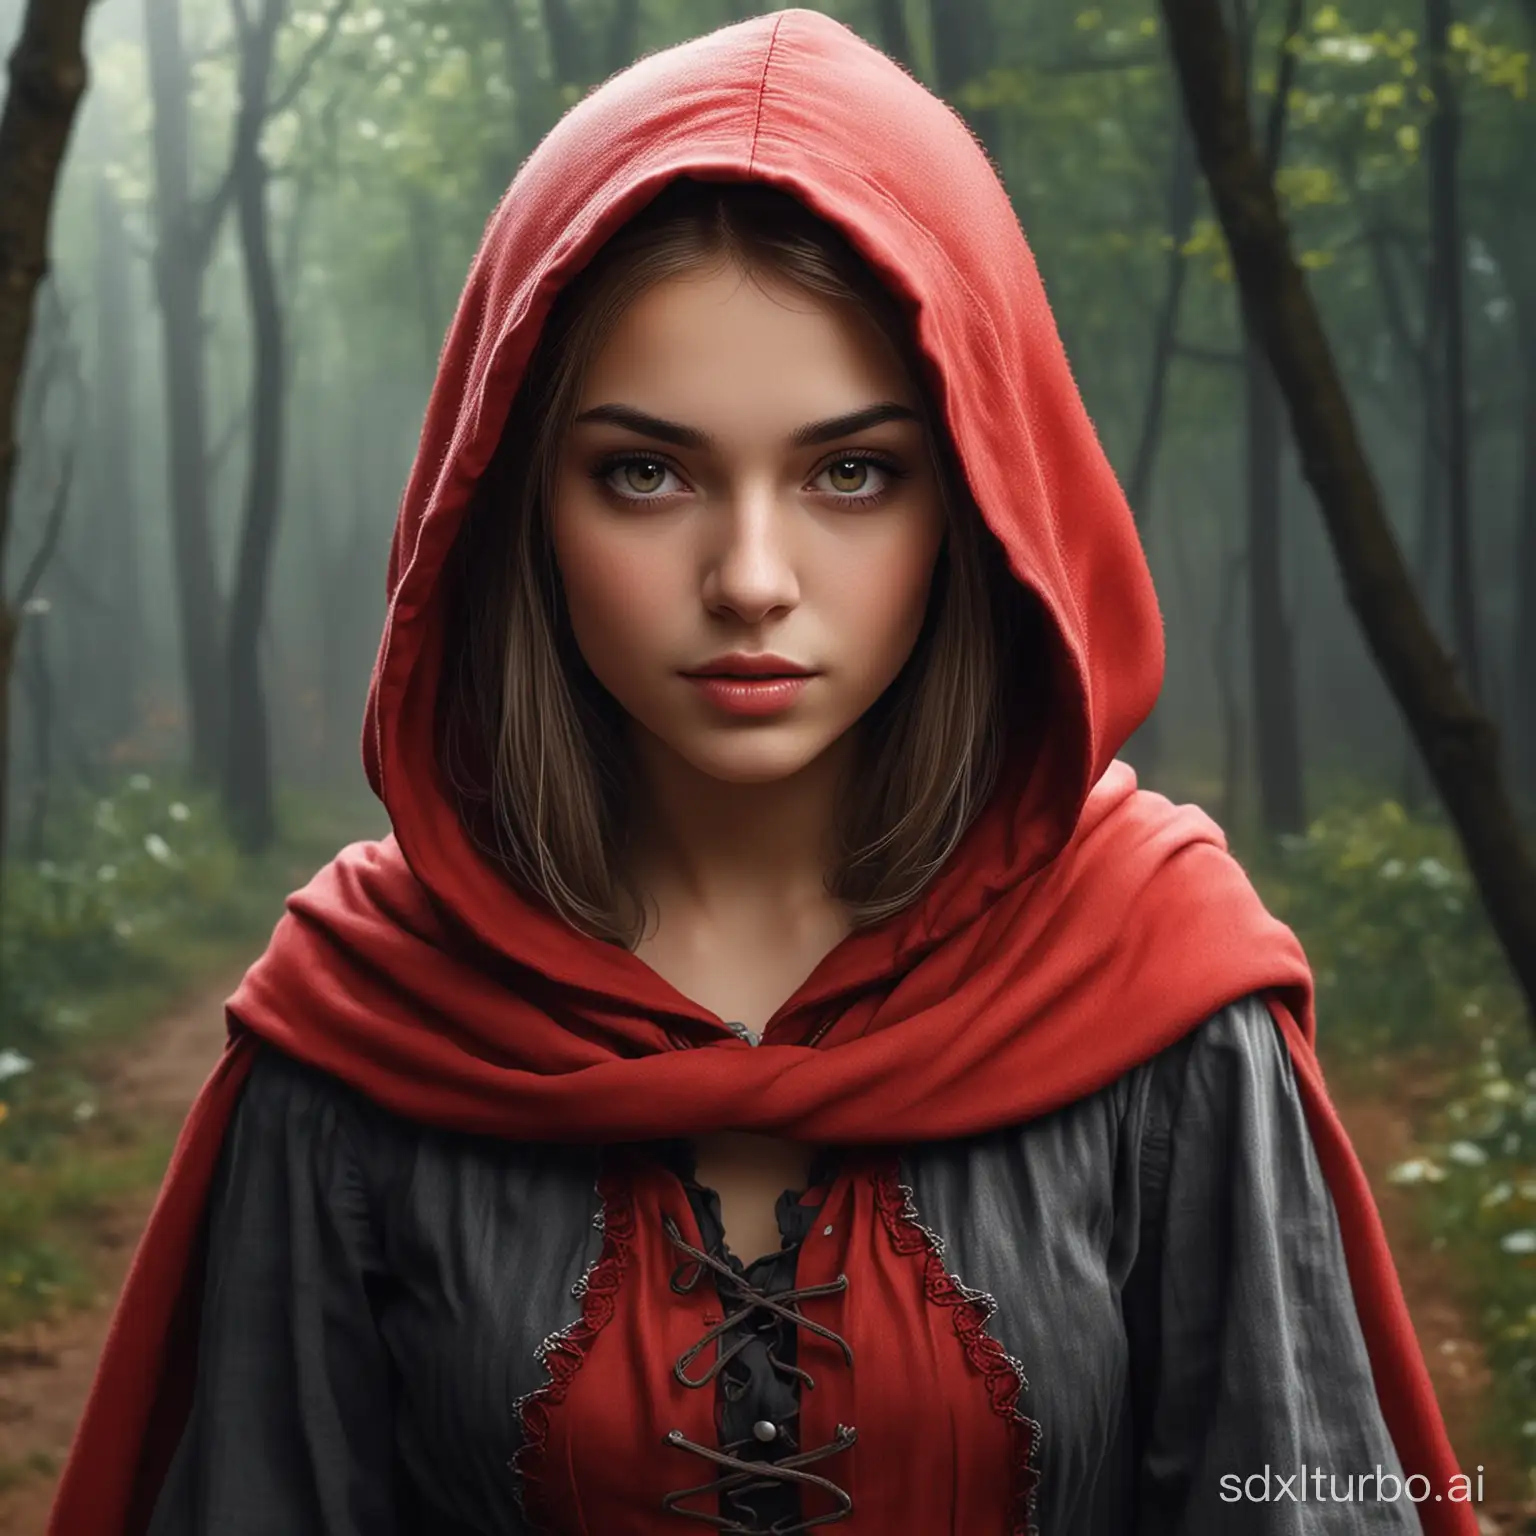 Little-Red-Riding-Hood-Fantasy-Art-Enchanting-Fairy-Tale-Character-in-Realistic-High-Quality